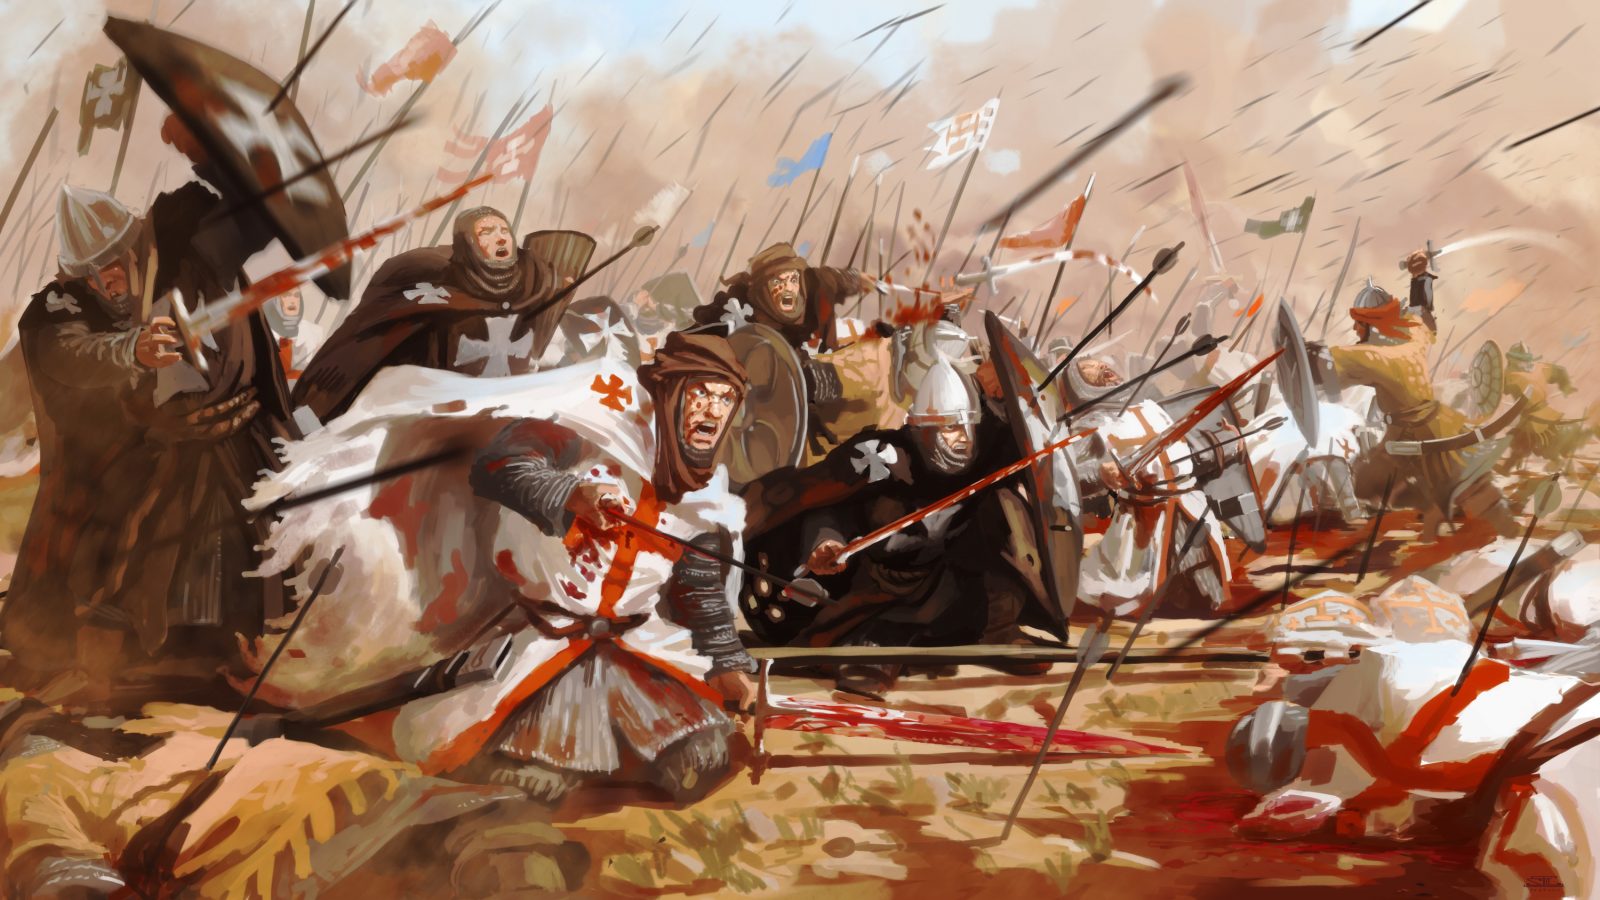 How Long Would You Survive in the Middle Ages? Battle In The Middle Ages